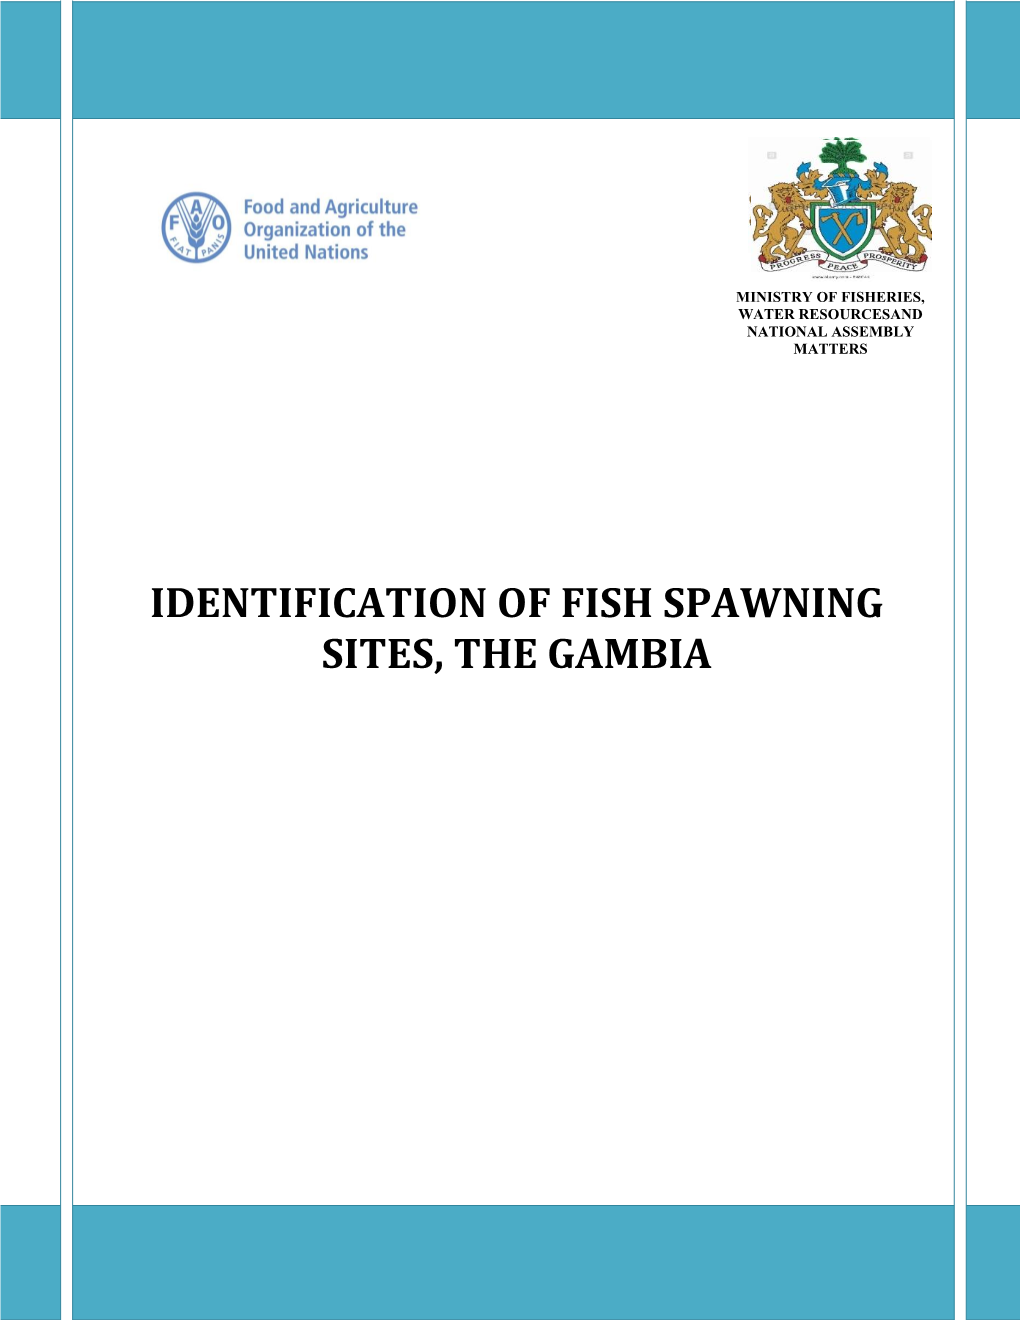 Identification of Fish Spawning Sites, the Gambia